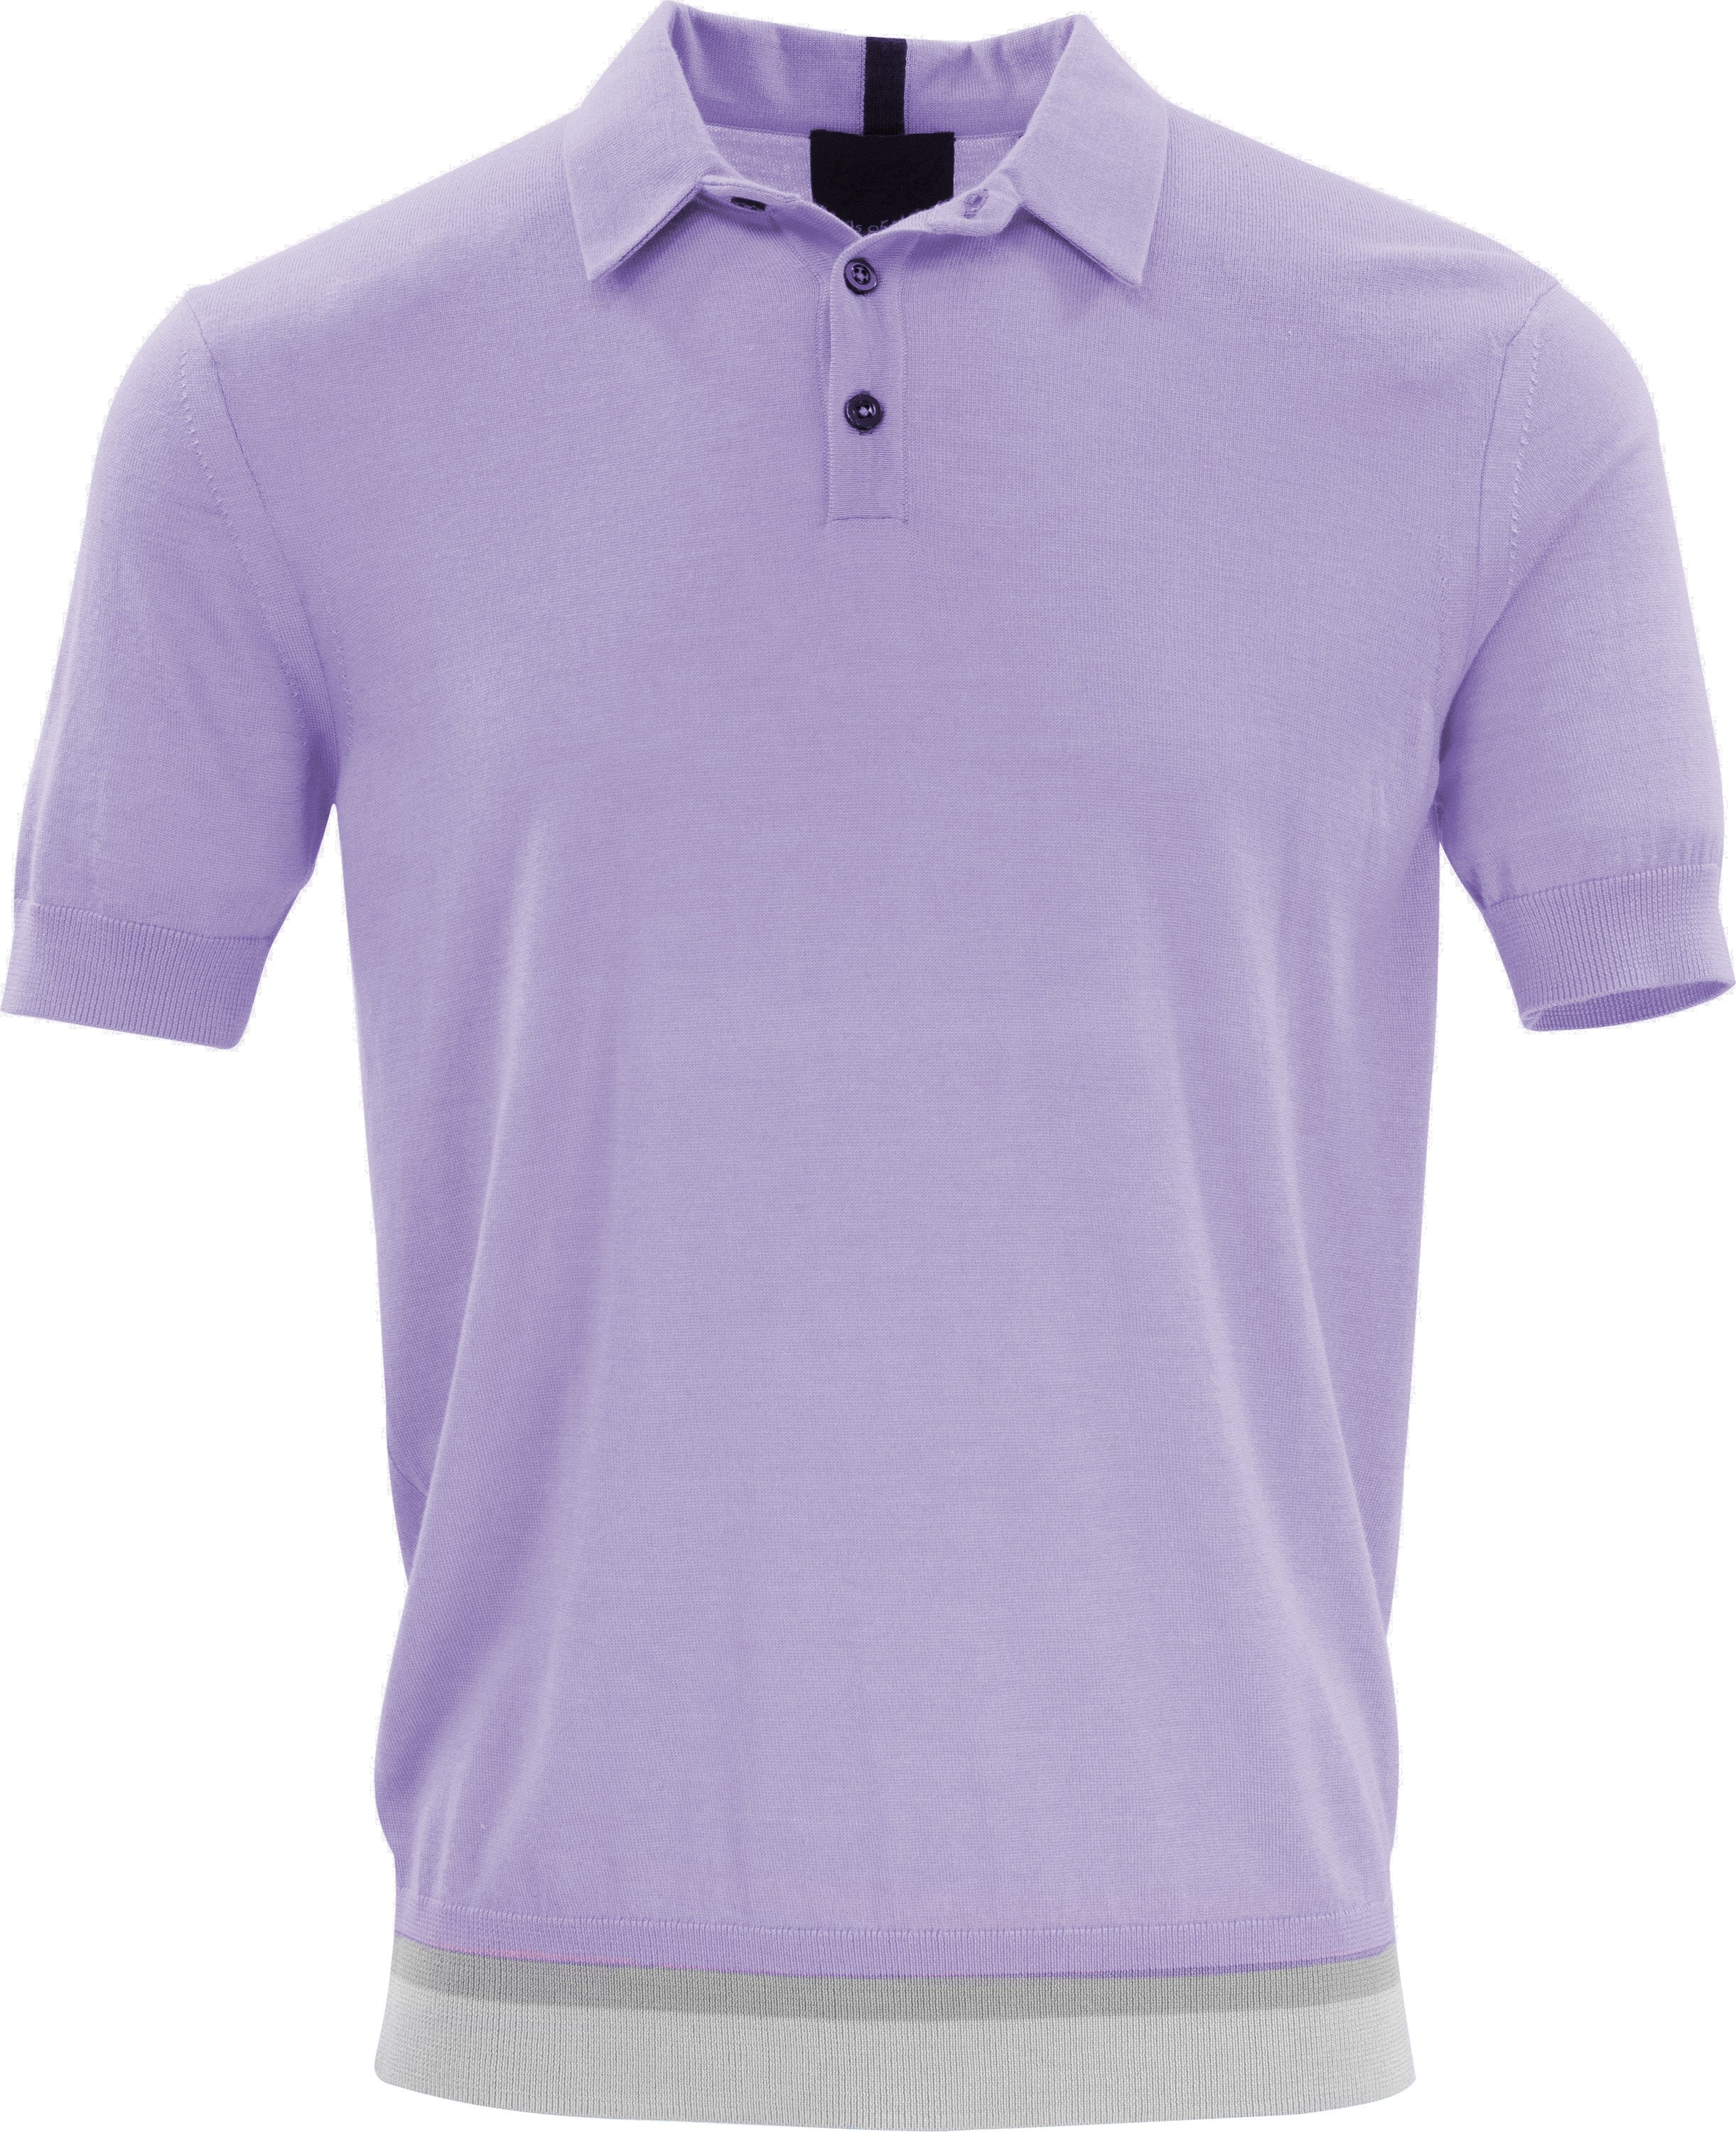 Men’s Pink / Purple Pilgrim Polo Shirt - Lavender Extra Small Lords of Harlech